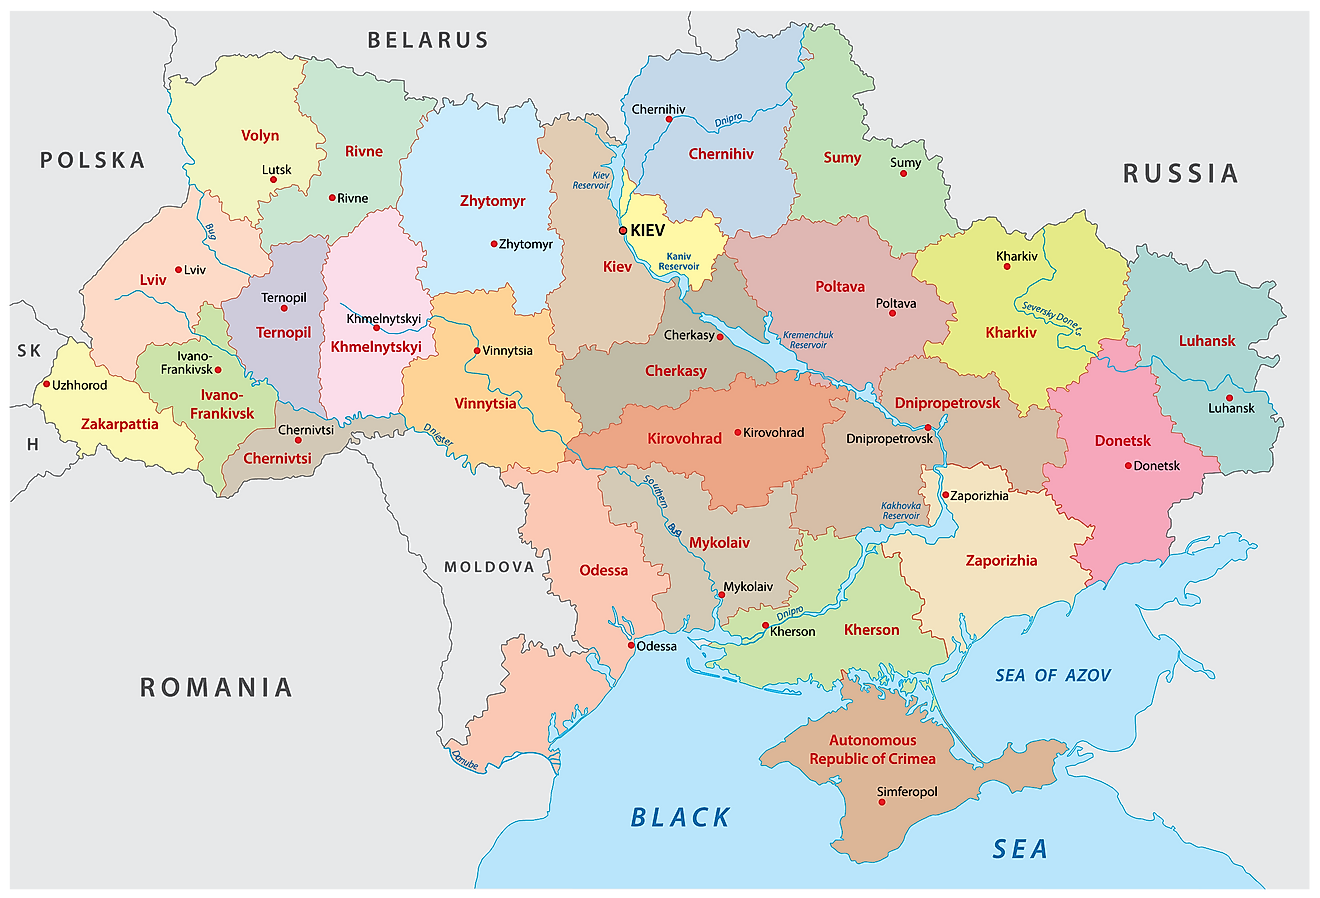 Political Map of Ukraine showing 24 provinces and the capital city of Kiev.